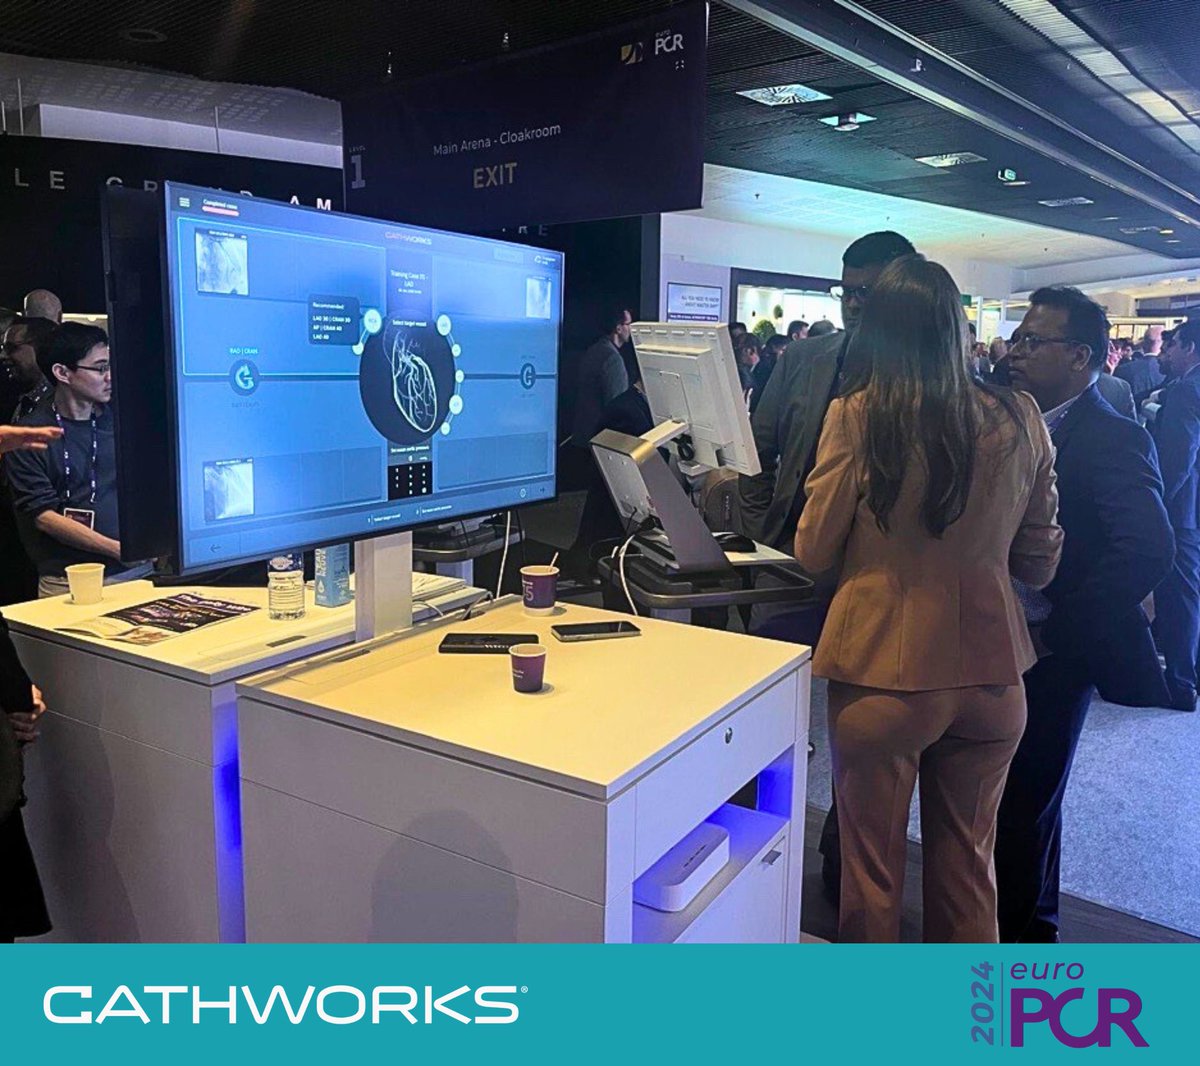 The #FFRangio System continued to generate buzz and excitement during another action-packed day at #EuroPCR. There was a constant stream of keen physicians experiencing a hands-on demo at the @MedtronicCRDN booth and the CathWorks FFRangio technology was featured in two highly